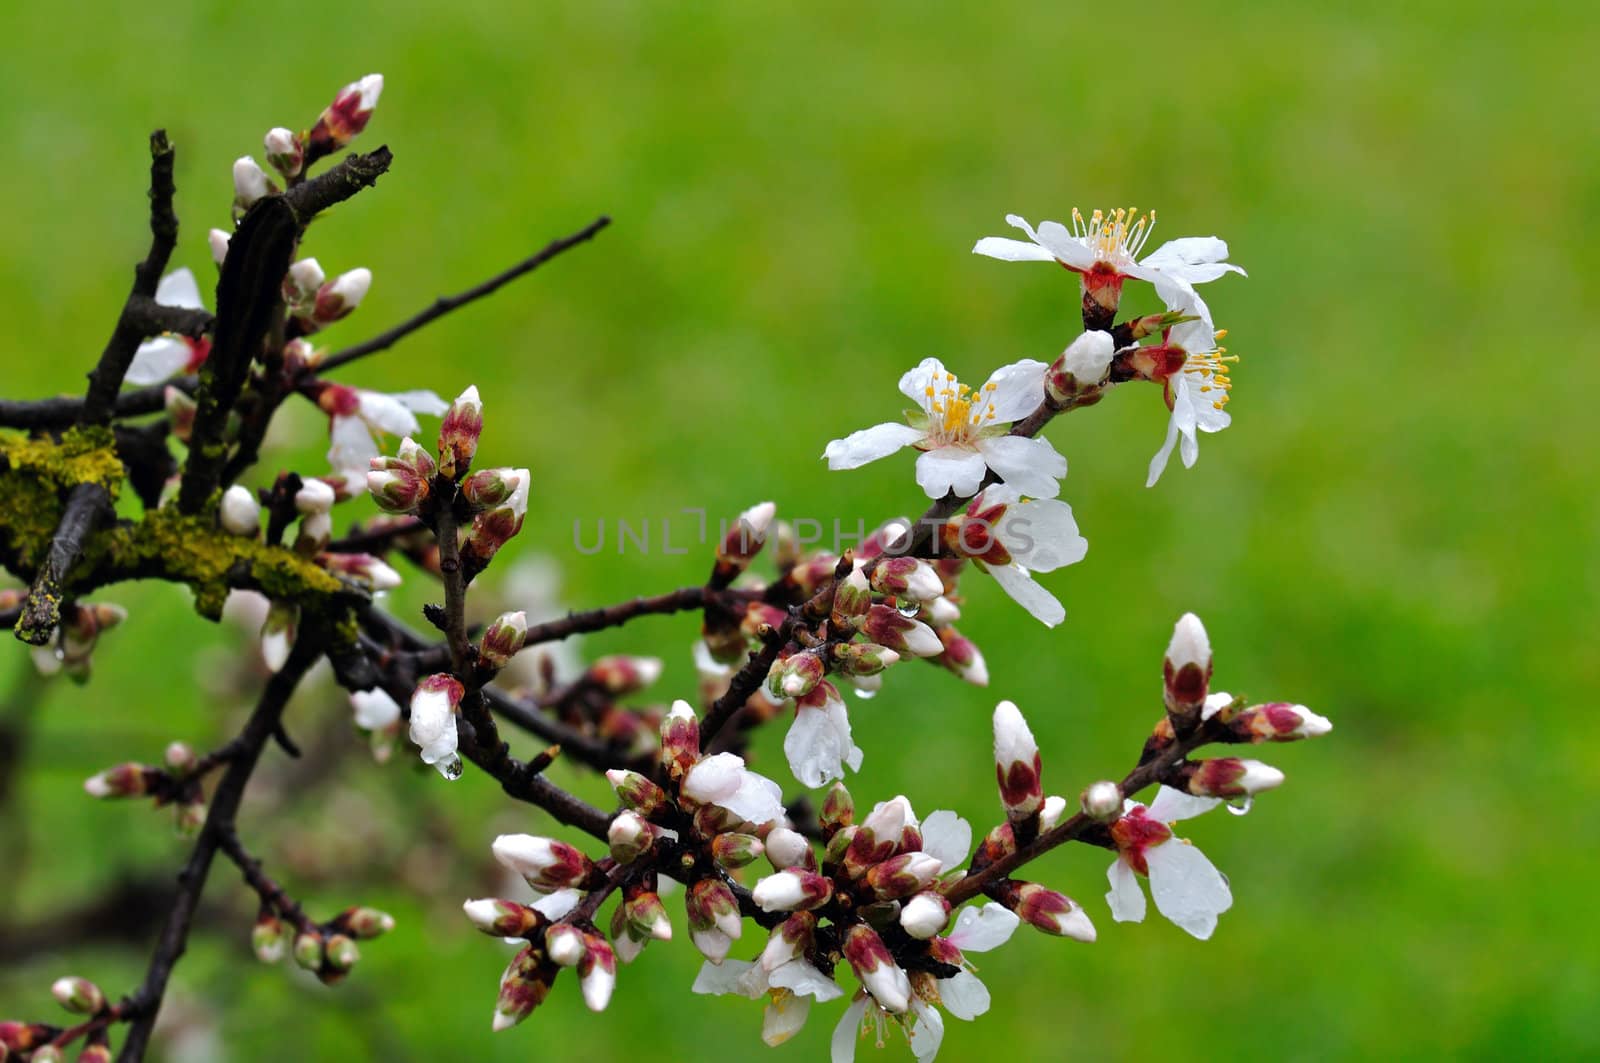 almond buds and flowers after the rain by sirylok